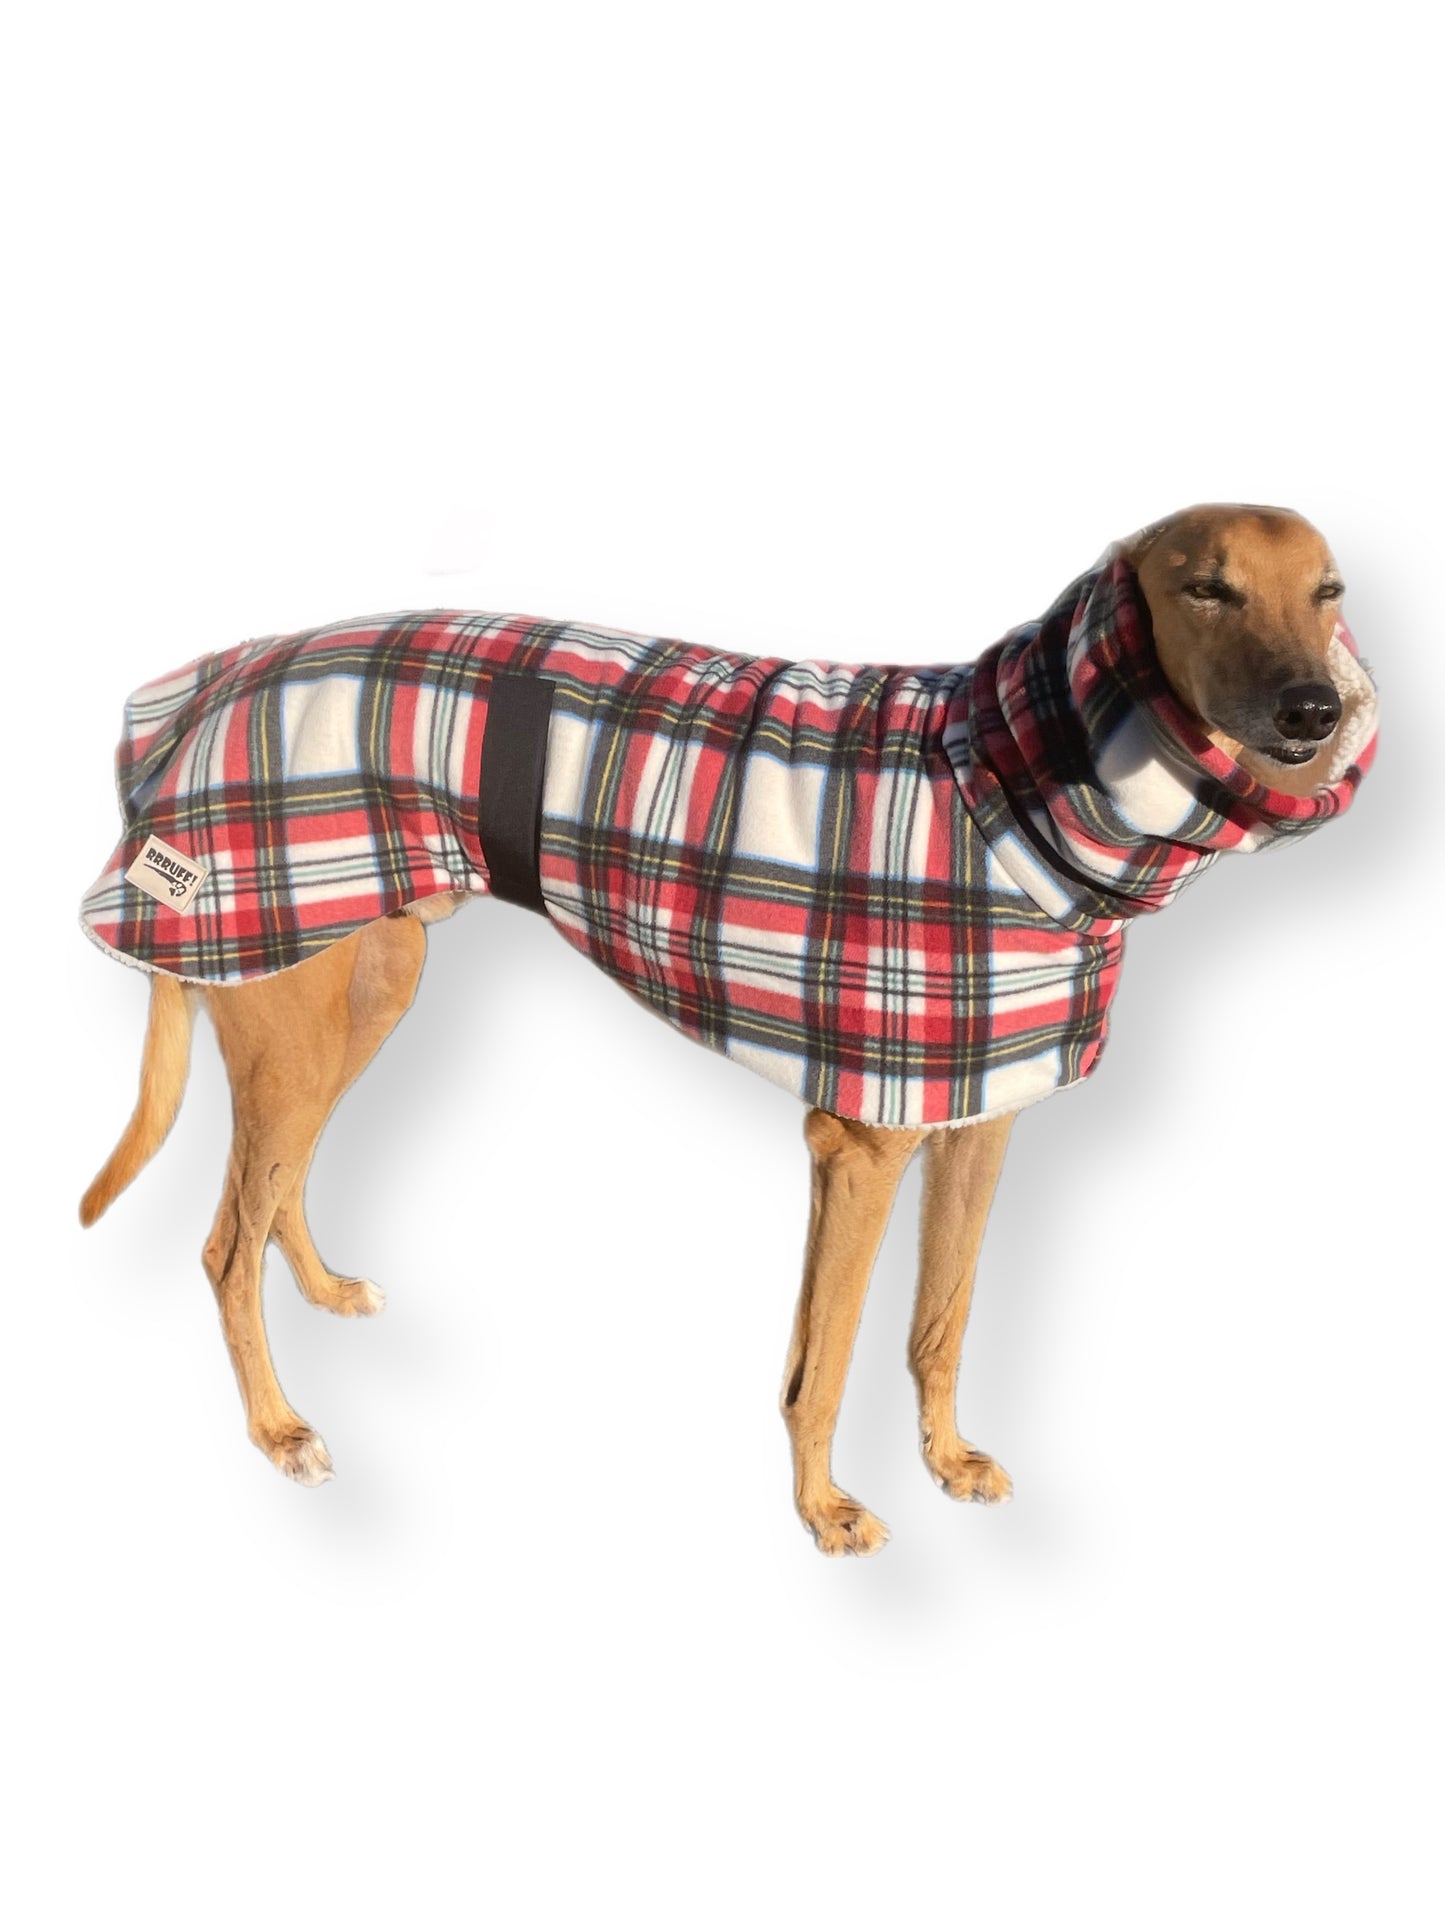 Trendsetter Lumberjack Greyhound coat in deluxe style rug flanno check polar fleece washable extra wide neck